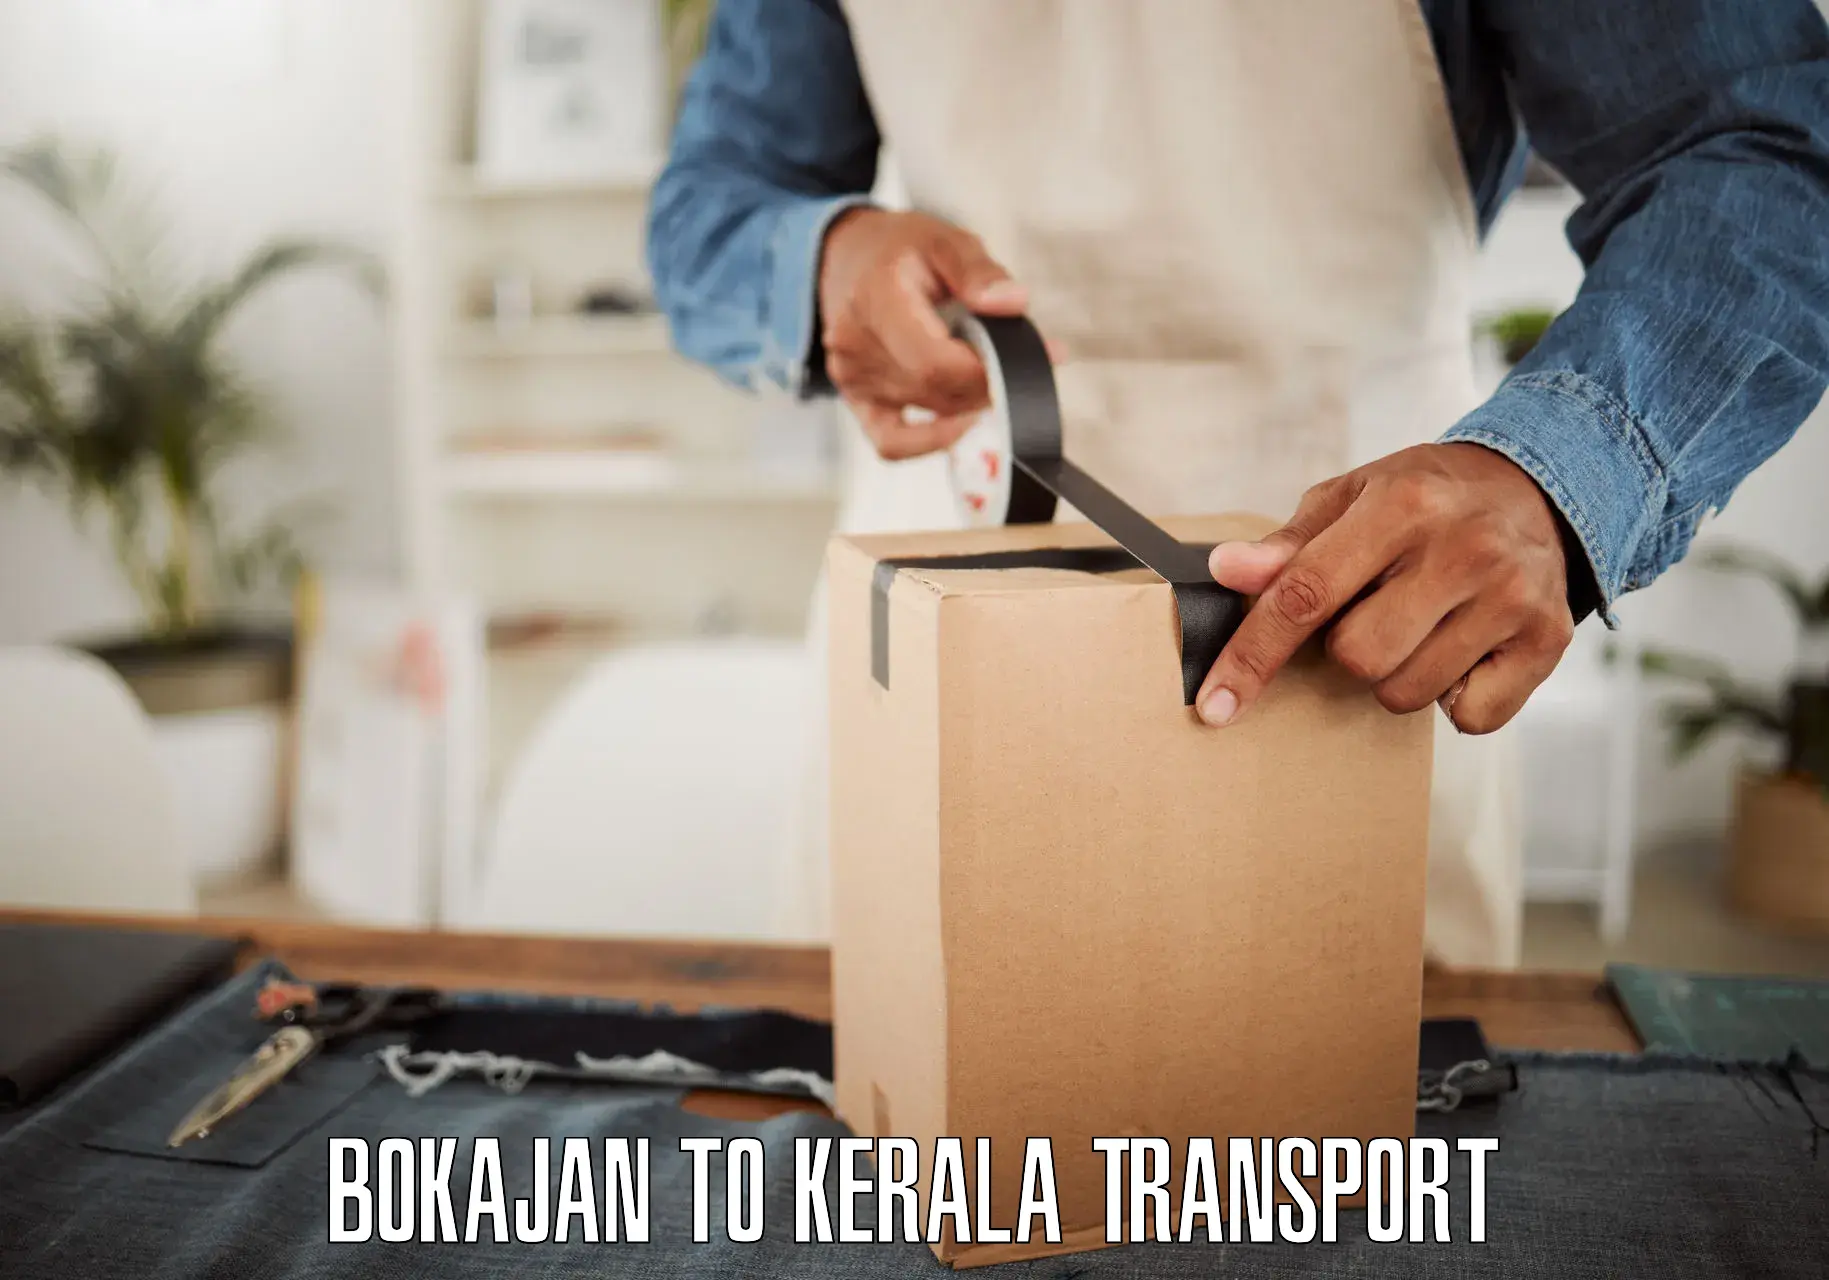 Transport bike from one state to another Bokajan to Kerala